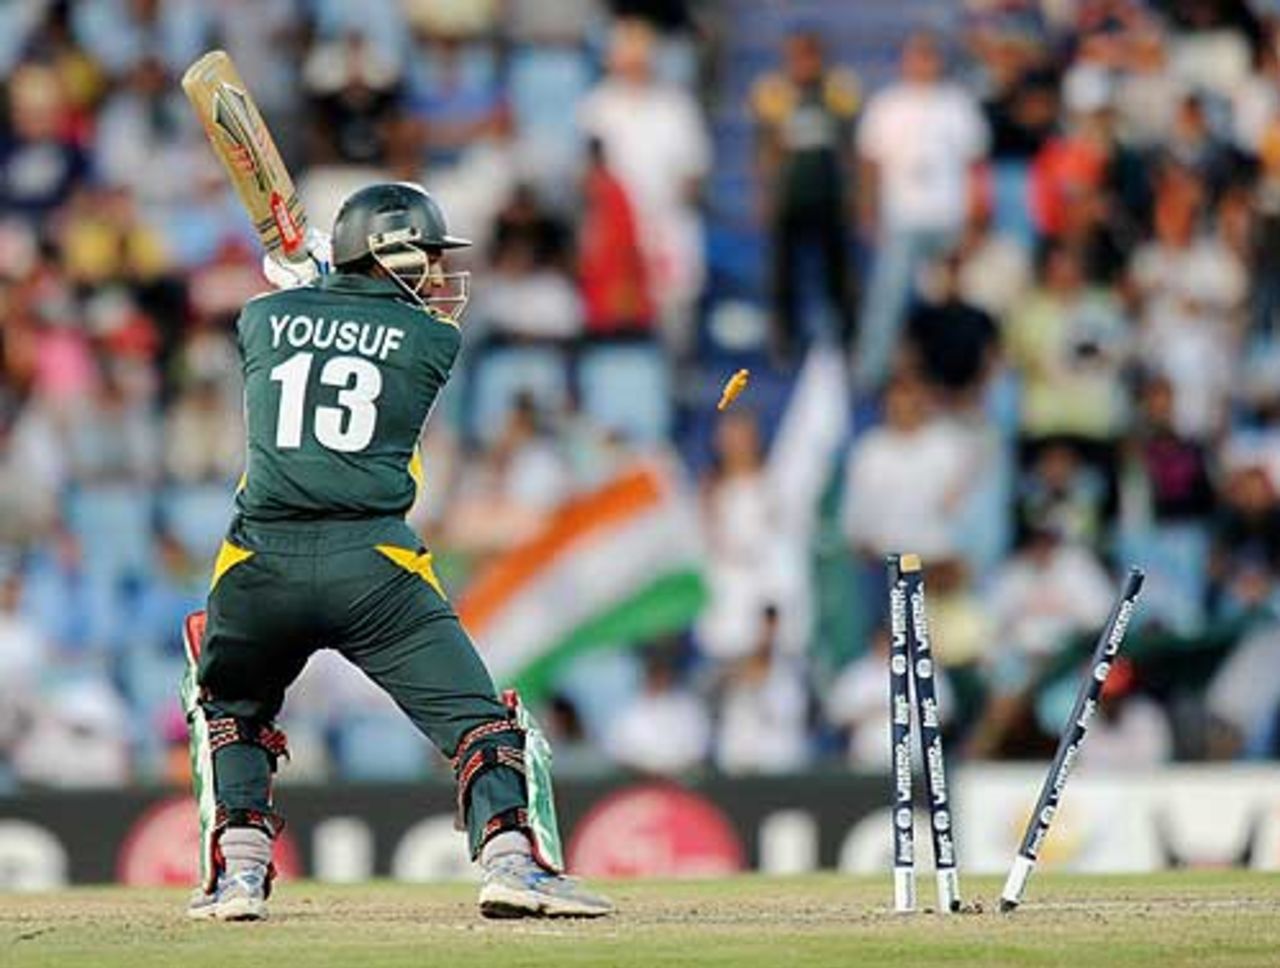 Mohammad Yousuf is bowled by Ashish Nehra, India v Pakistan, Champions Trophy, Group A, Centurion, September 26, 2009